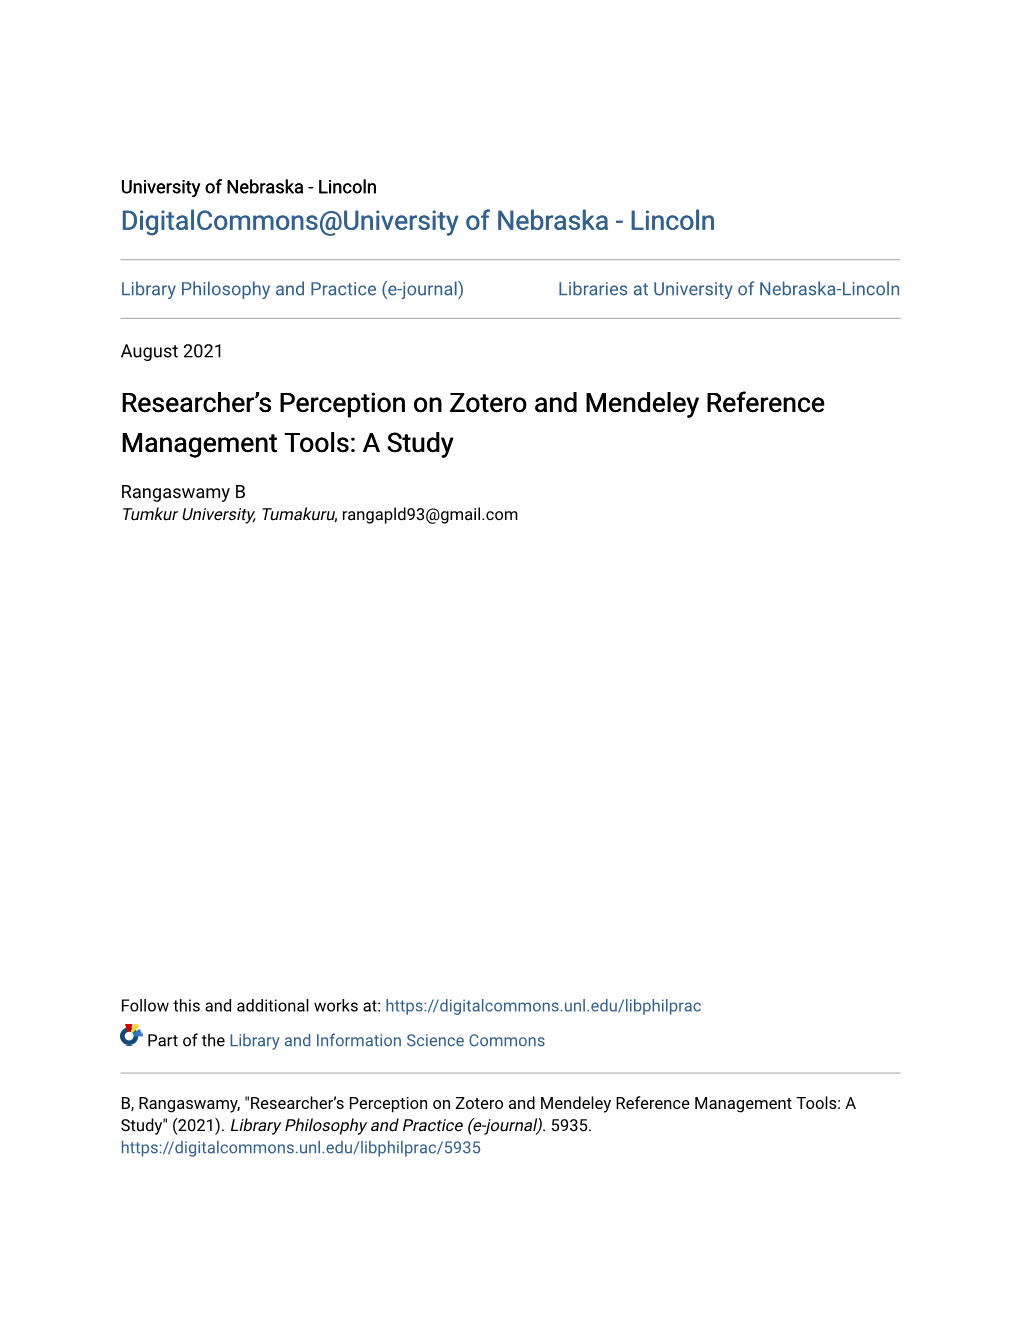 Researcher's Perception on Zotero and Mendeley Reference